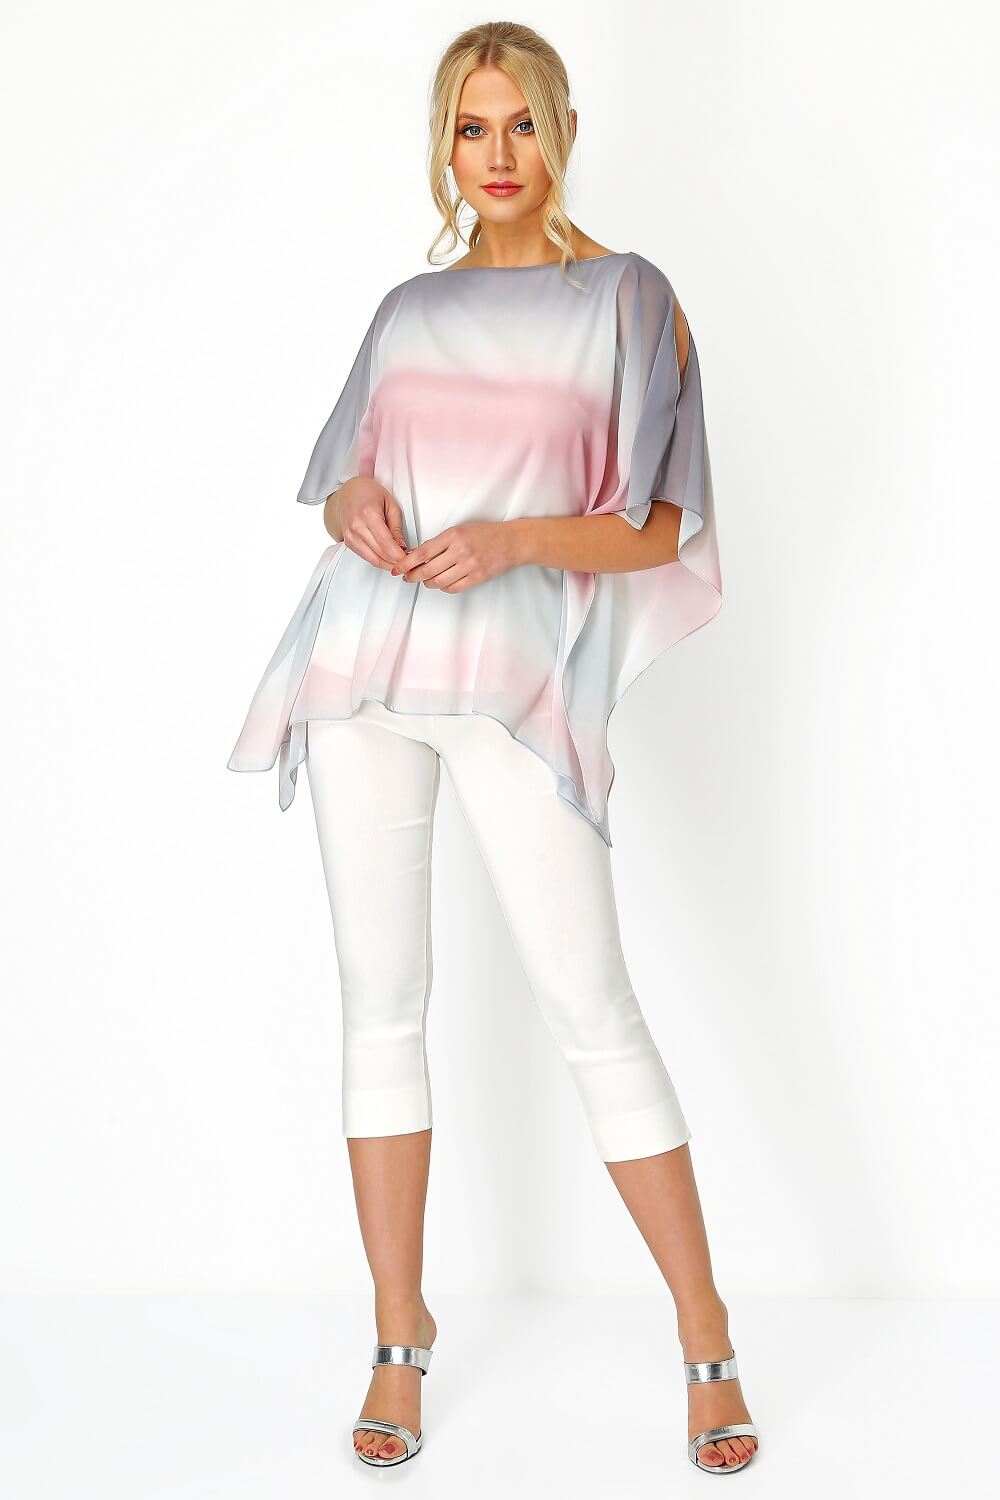 PINK Ombre Split Sleeve Overlay Top, Image 2 of 8